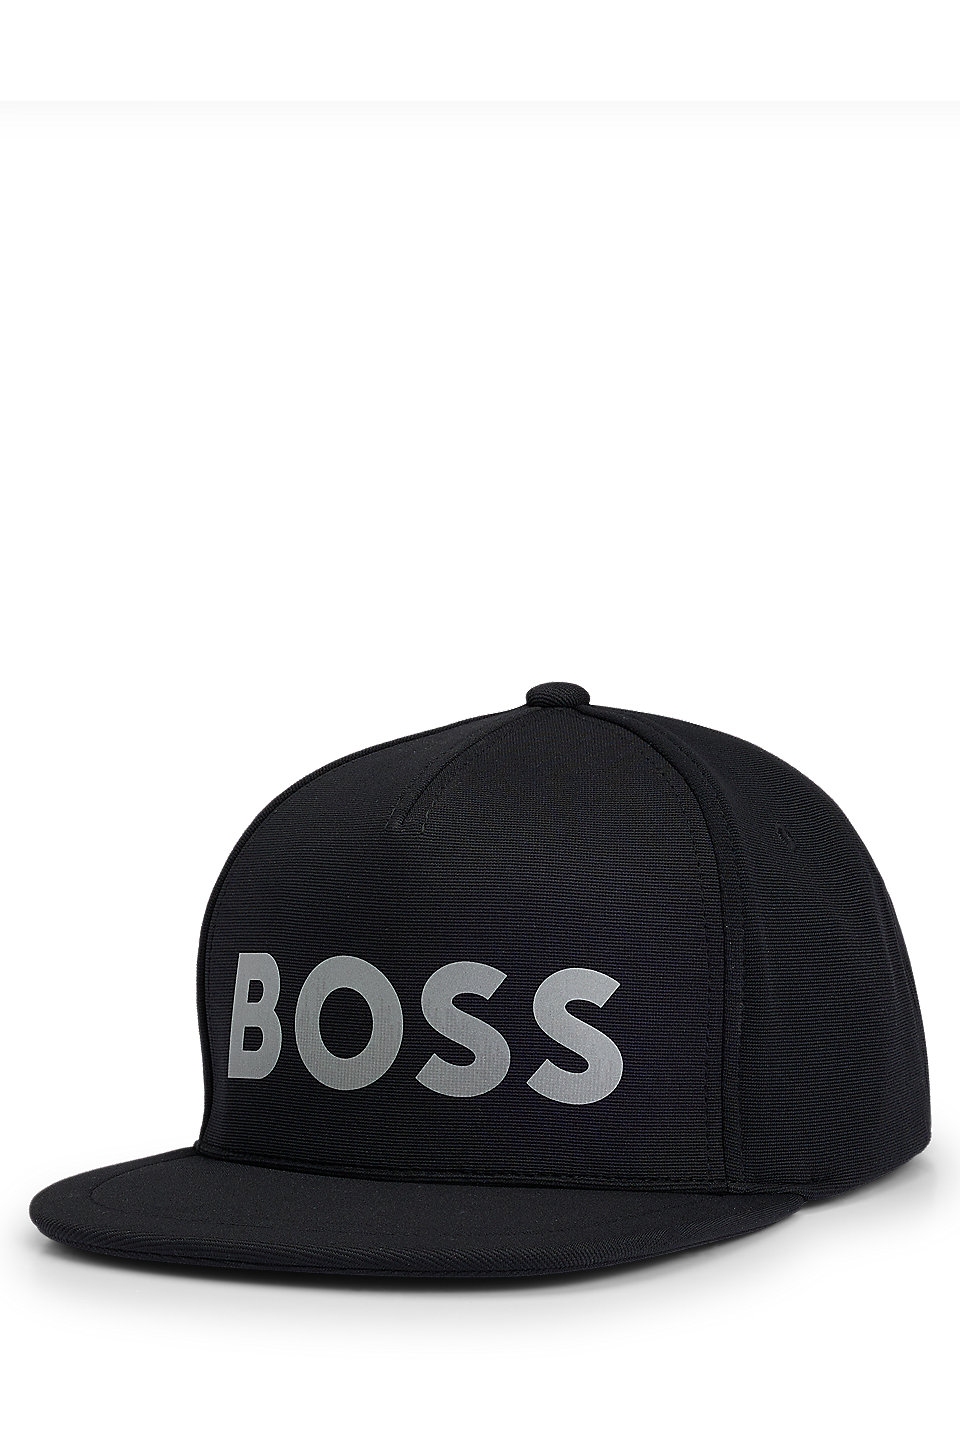 BOSS - Stretch-jersey cap with decorative reflective logo